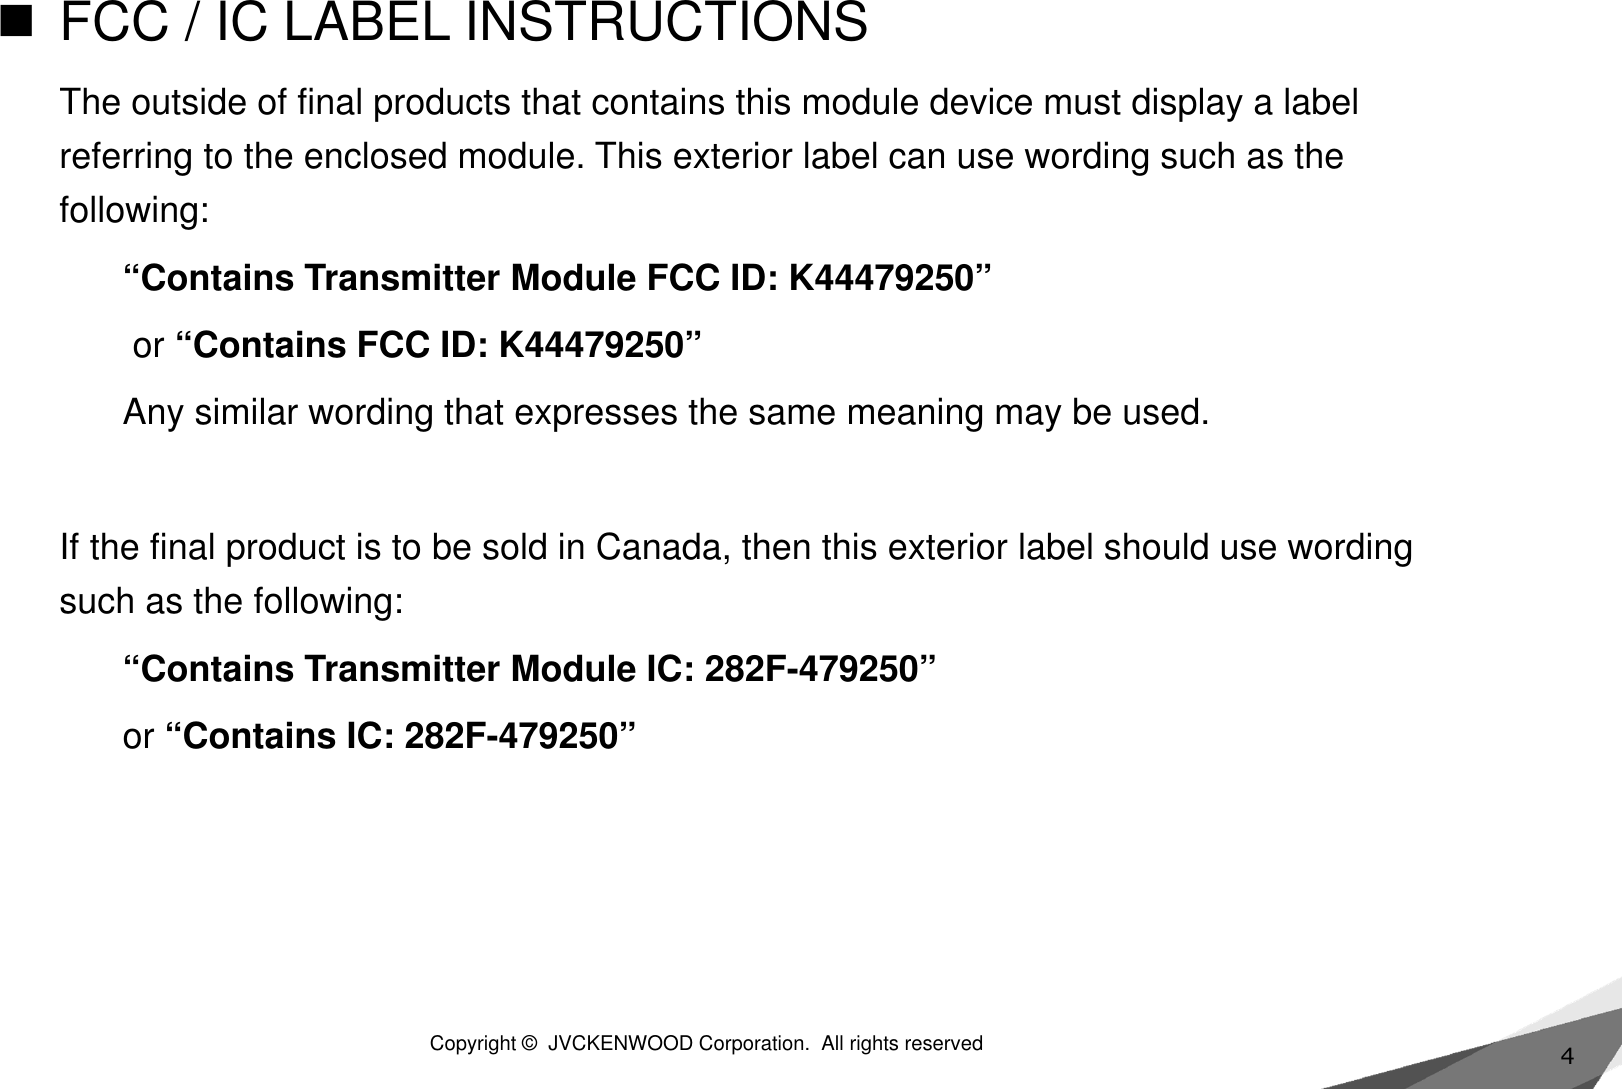 4FCC / IC LABEL INSTRUCTIONSThe outside of final products that contains this module device must display a label referring to the enclosed module. This exterior label can use wording such as the following:“Contains Transmitter Module FCC ID: K44479250”or “Contains FCC ID: K44479250”Any similar wording that expresses the same meaning may be used. If the final product is to be sold in Canada, then this exterior label should use wording such as the following:“Contains Transmitter Module IC: 282F-479250”or “Contains IC: 282F-479250” Copyright ©  JVCKENWOOD Corporation.  All rights reserved